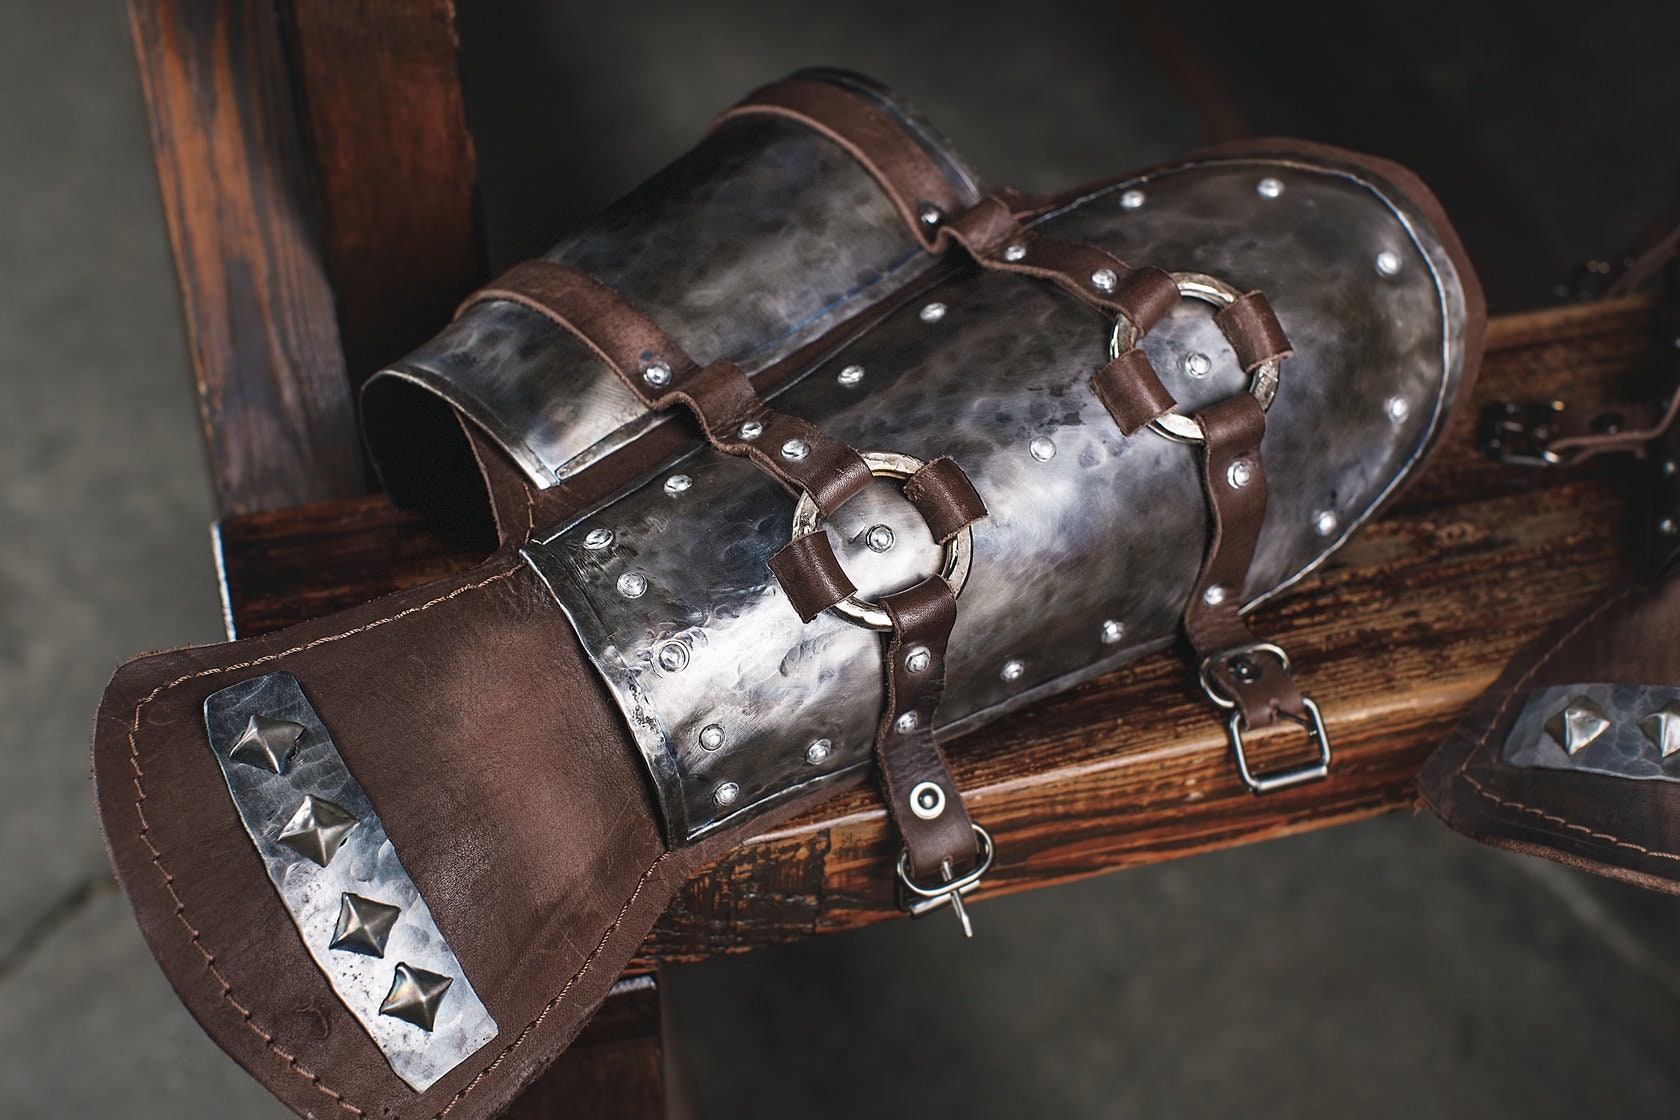 Steel Arm Armor Medieval Knightly Bracers for Authentic Protection -  MedieWorld